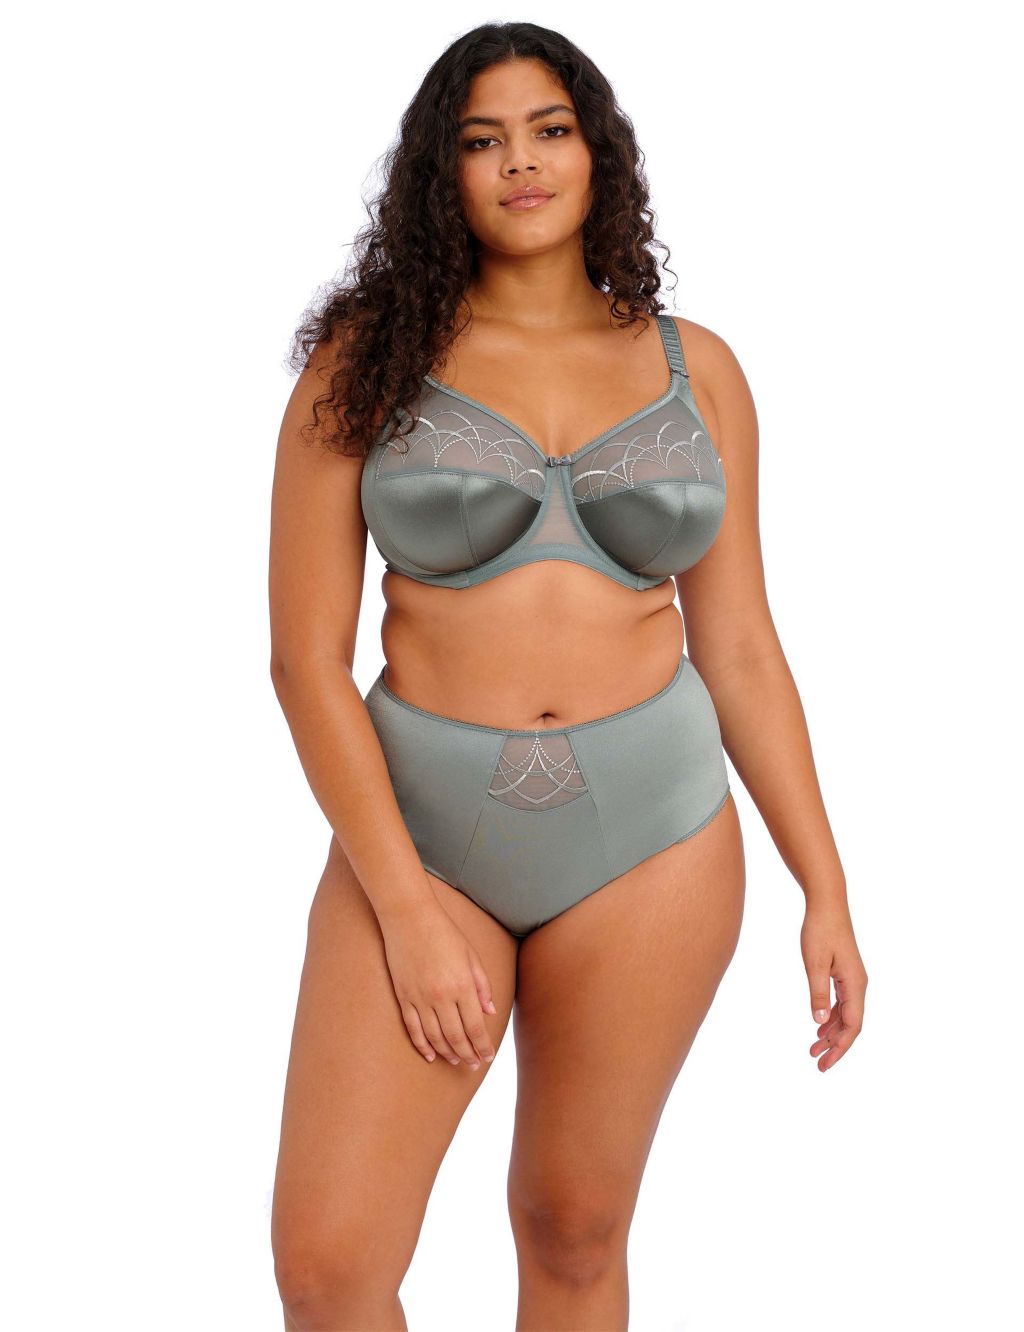 Cate Wired Full Cup Bra DD-K image 4